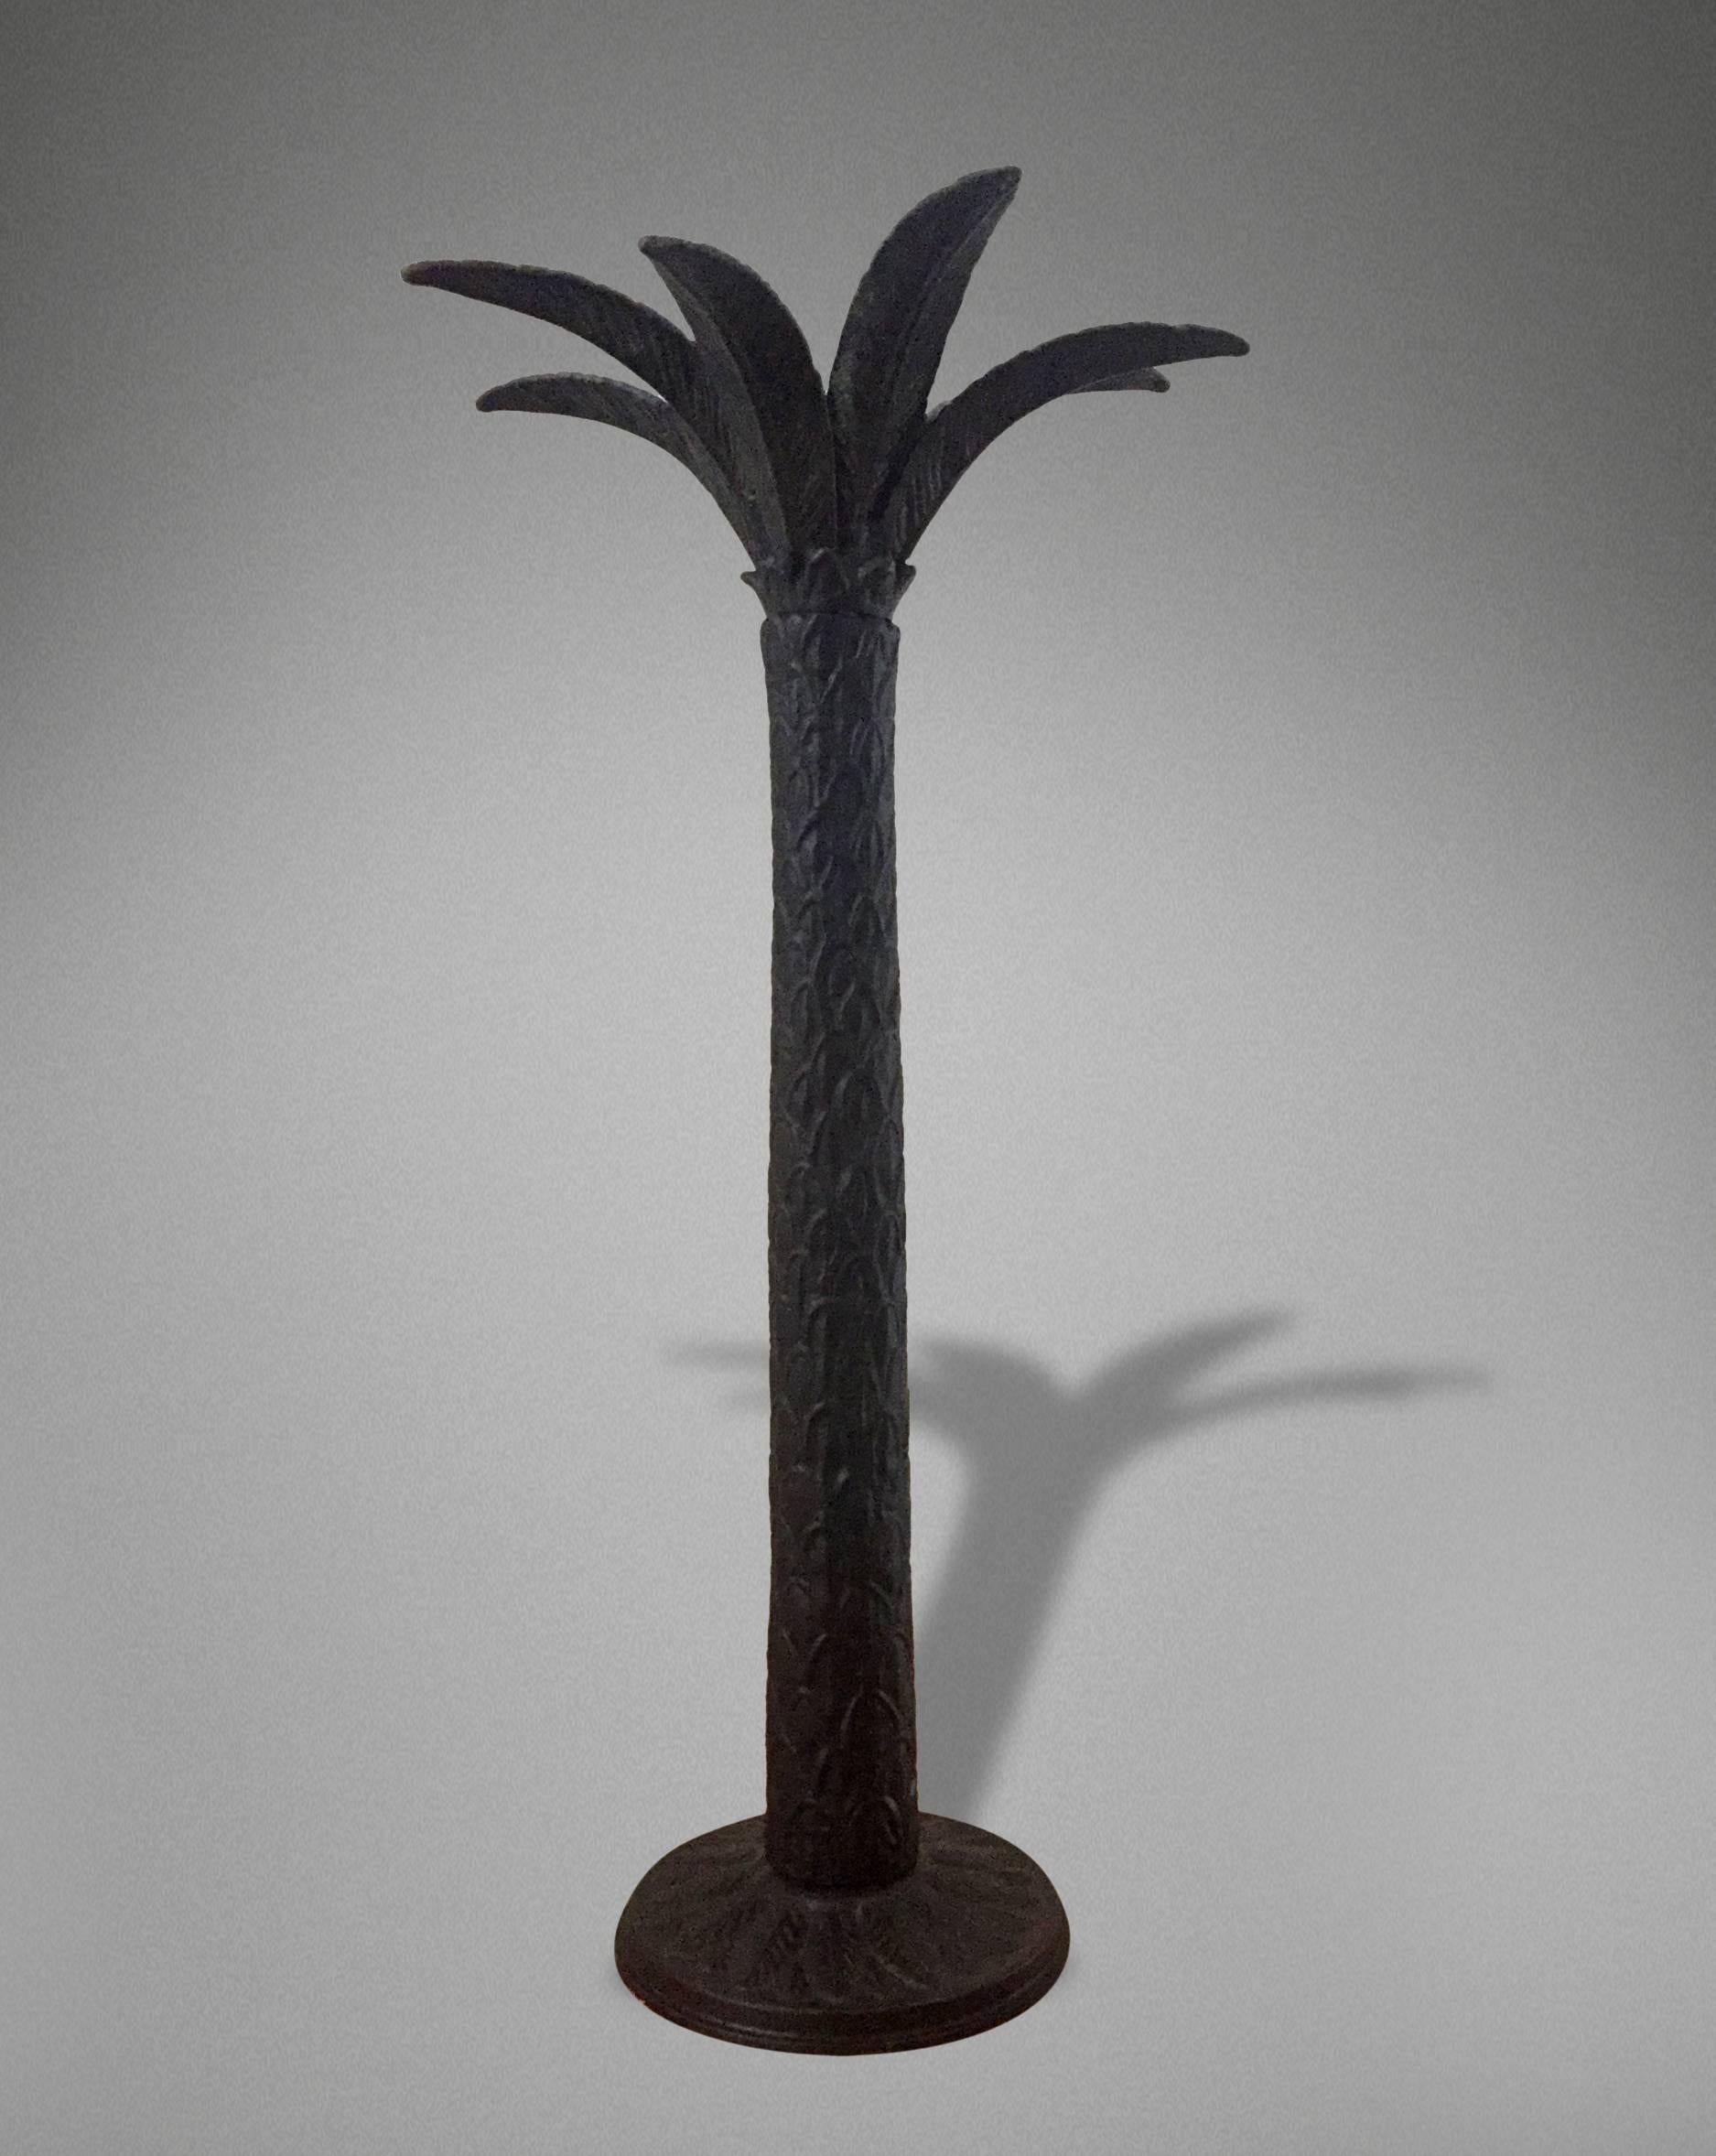 Bronze cast palm tree candlesticks

Can be purchased individually or as a pair.